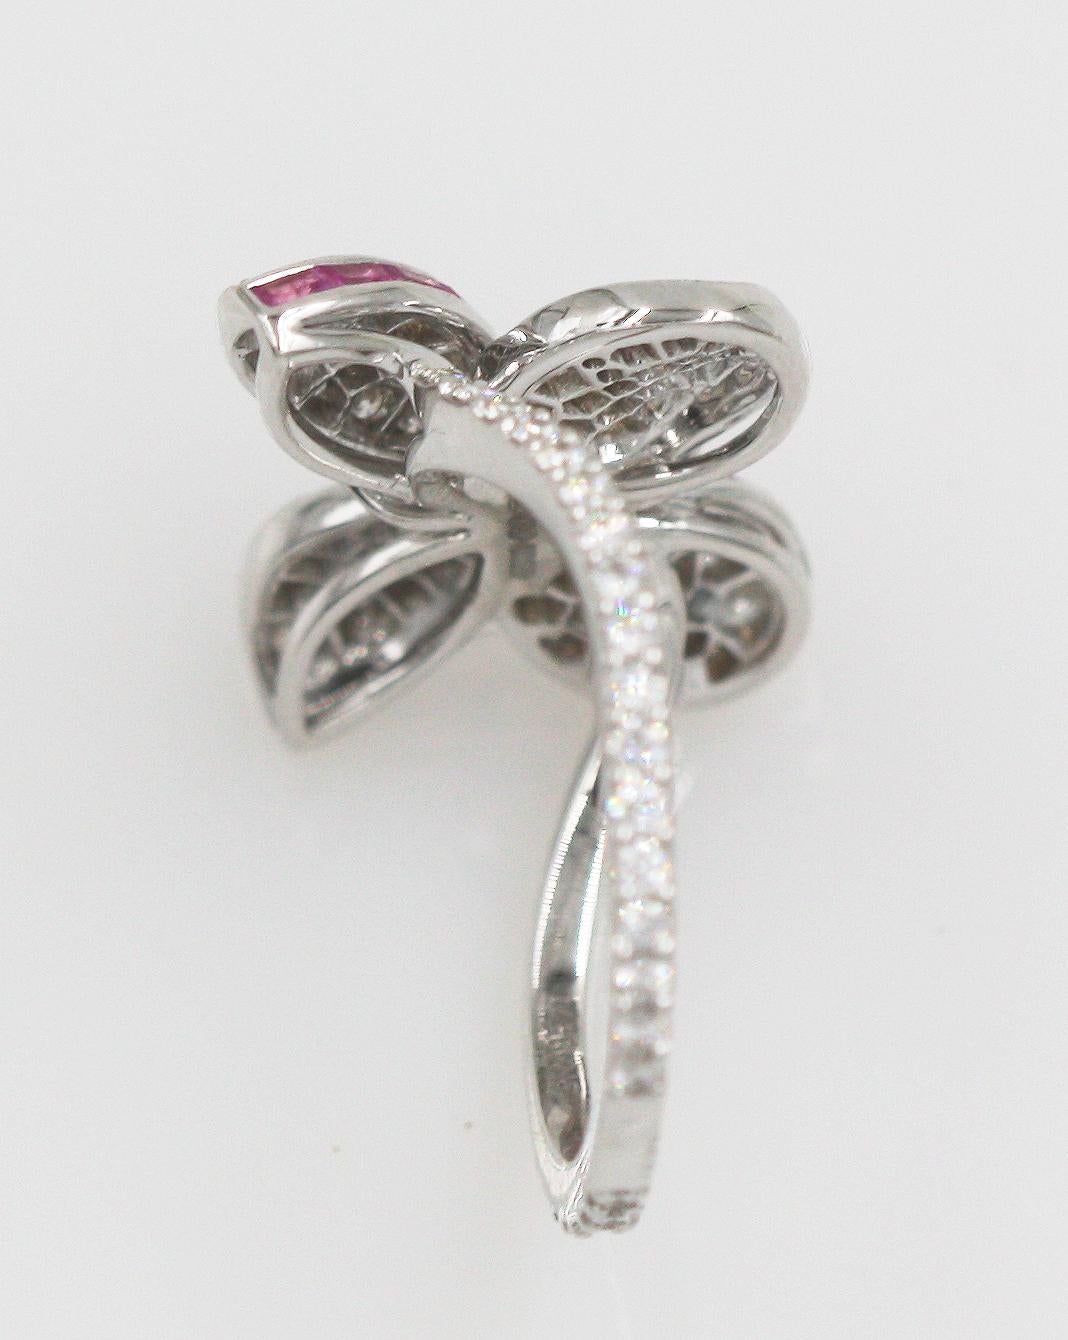 Ring Size: 49; US: 4.75 (this ring can be resize by Boutique)
22 Tapered Baguette Pink Sapphires weighing approx. 0.31 Carats.
127 Round Diamonds weighing approx. 0.64 Carats. Fine White. Clarity: VS+
5 Round Purple Sapphires weighing approx. 0.06